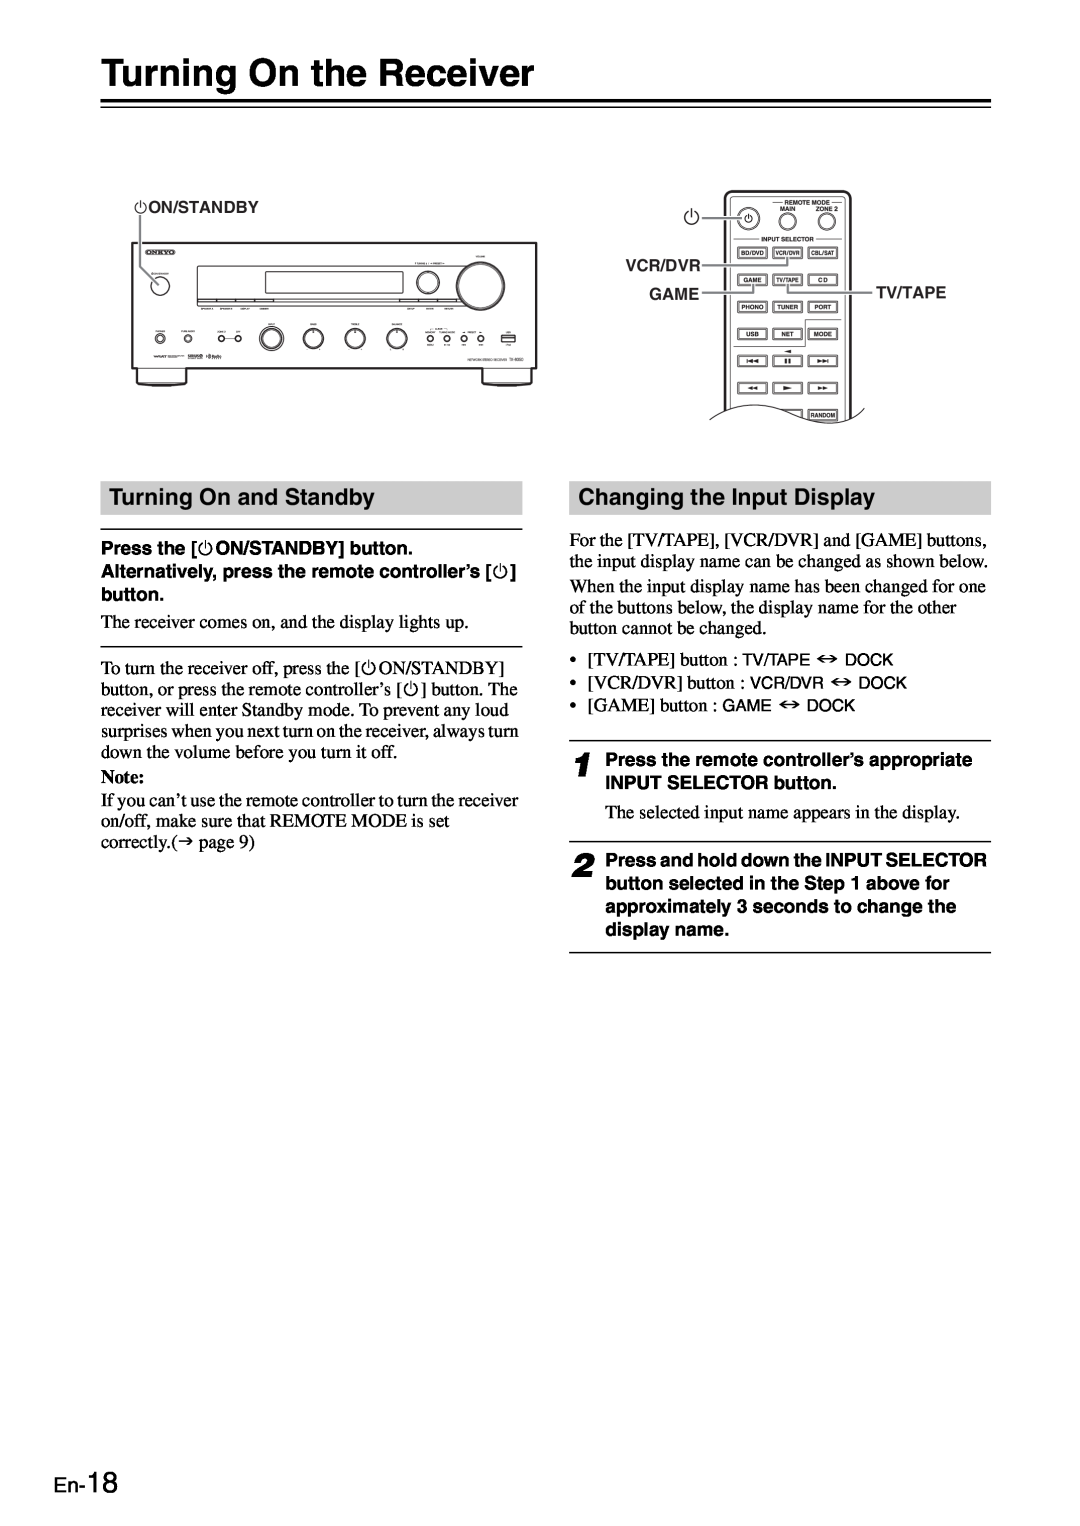 Onkyo TX-8050 instruction manual Turning On the Receiver, Turning On and Standby, Changing the Input Display, En-18 